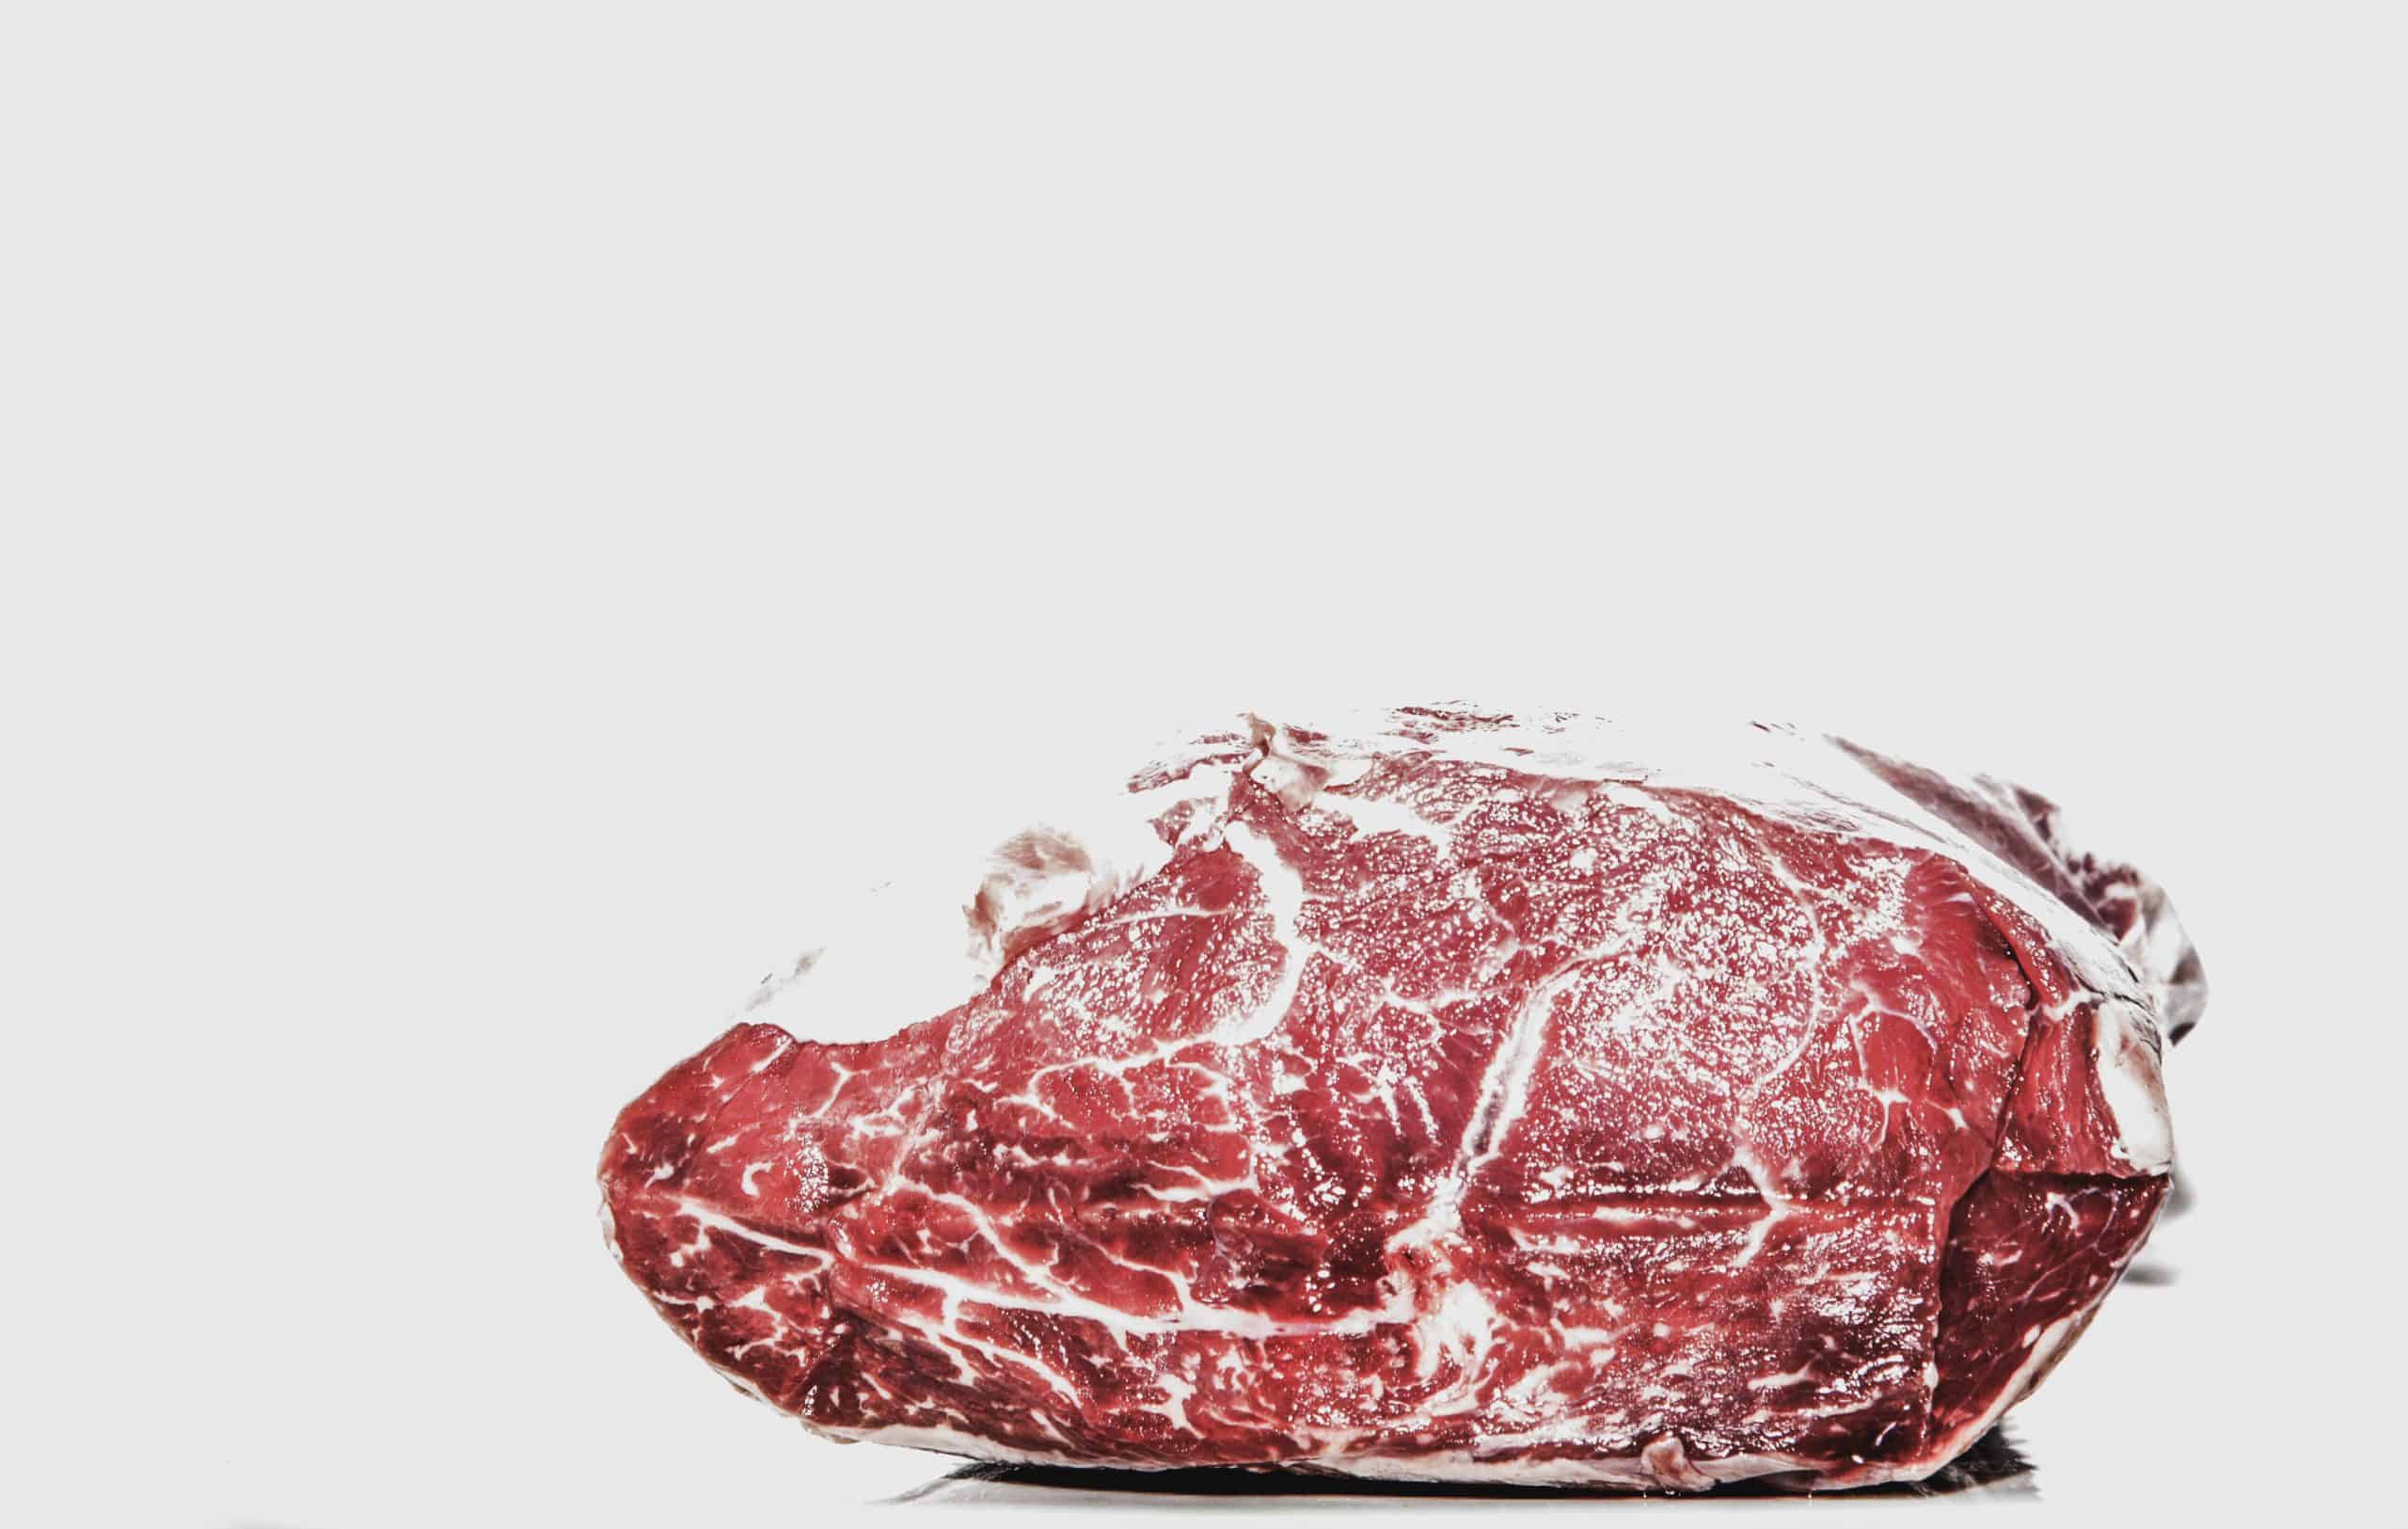 Best Type Of Meat: How To Make The Best Choice